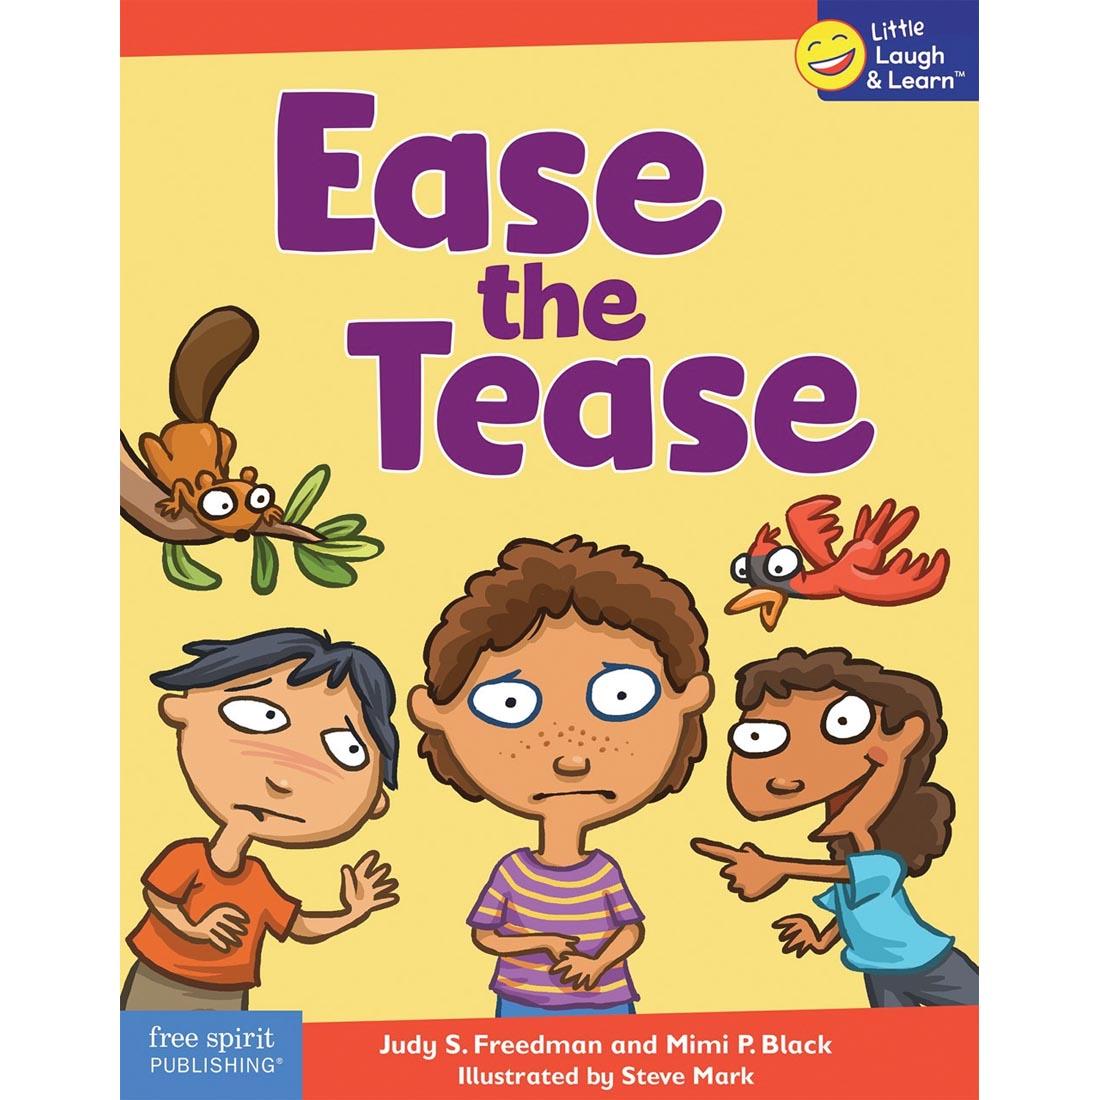 Ease the Tease book by Free Spirit Publishing